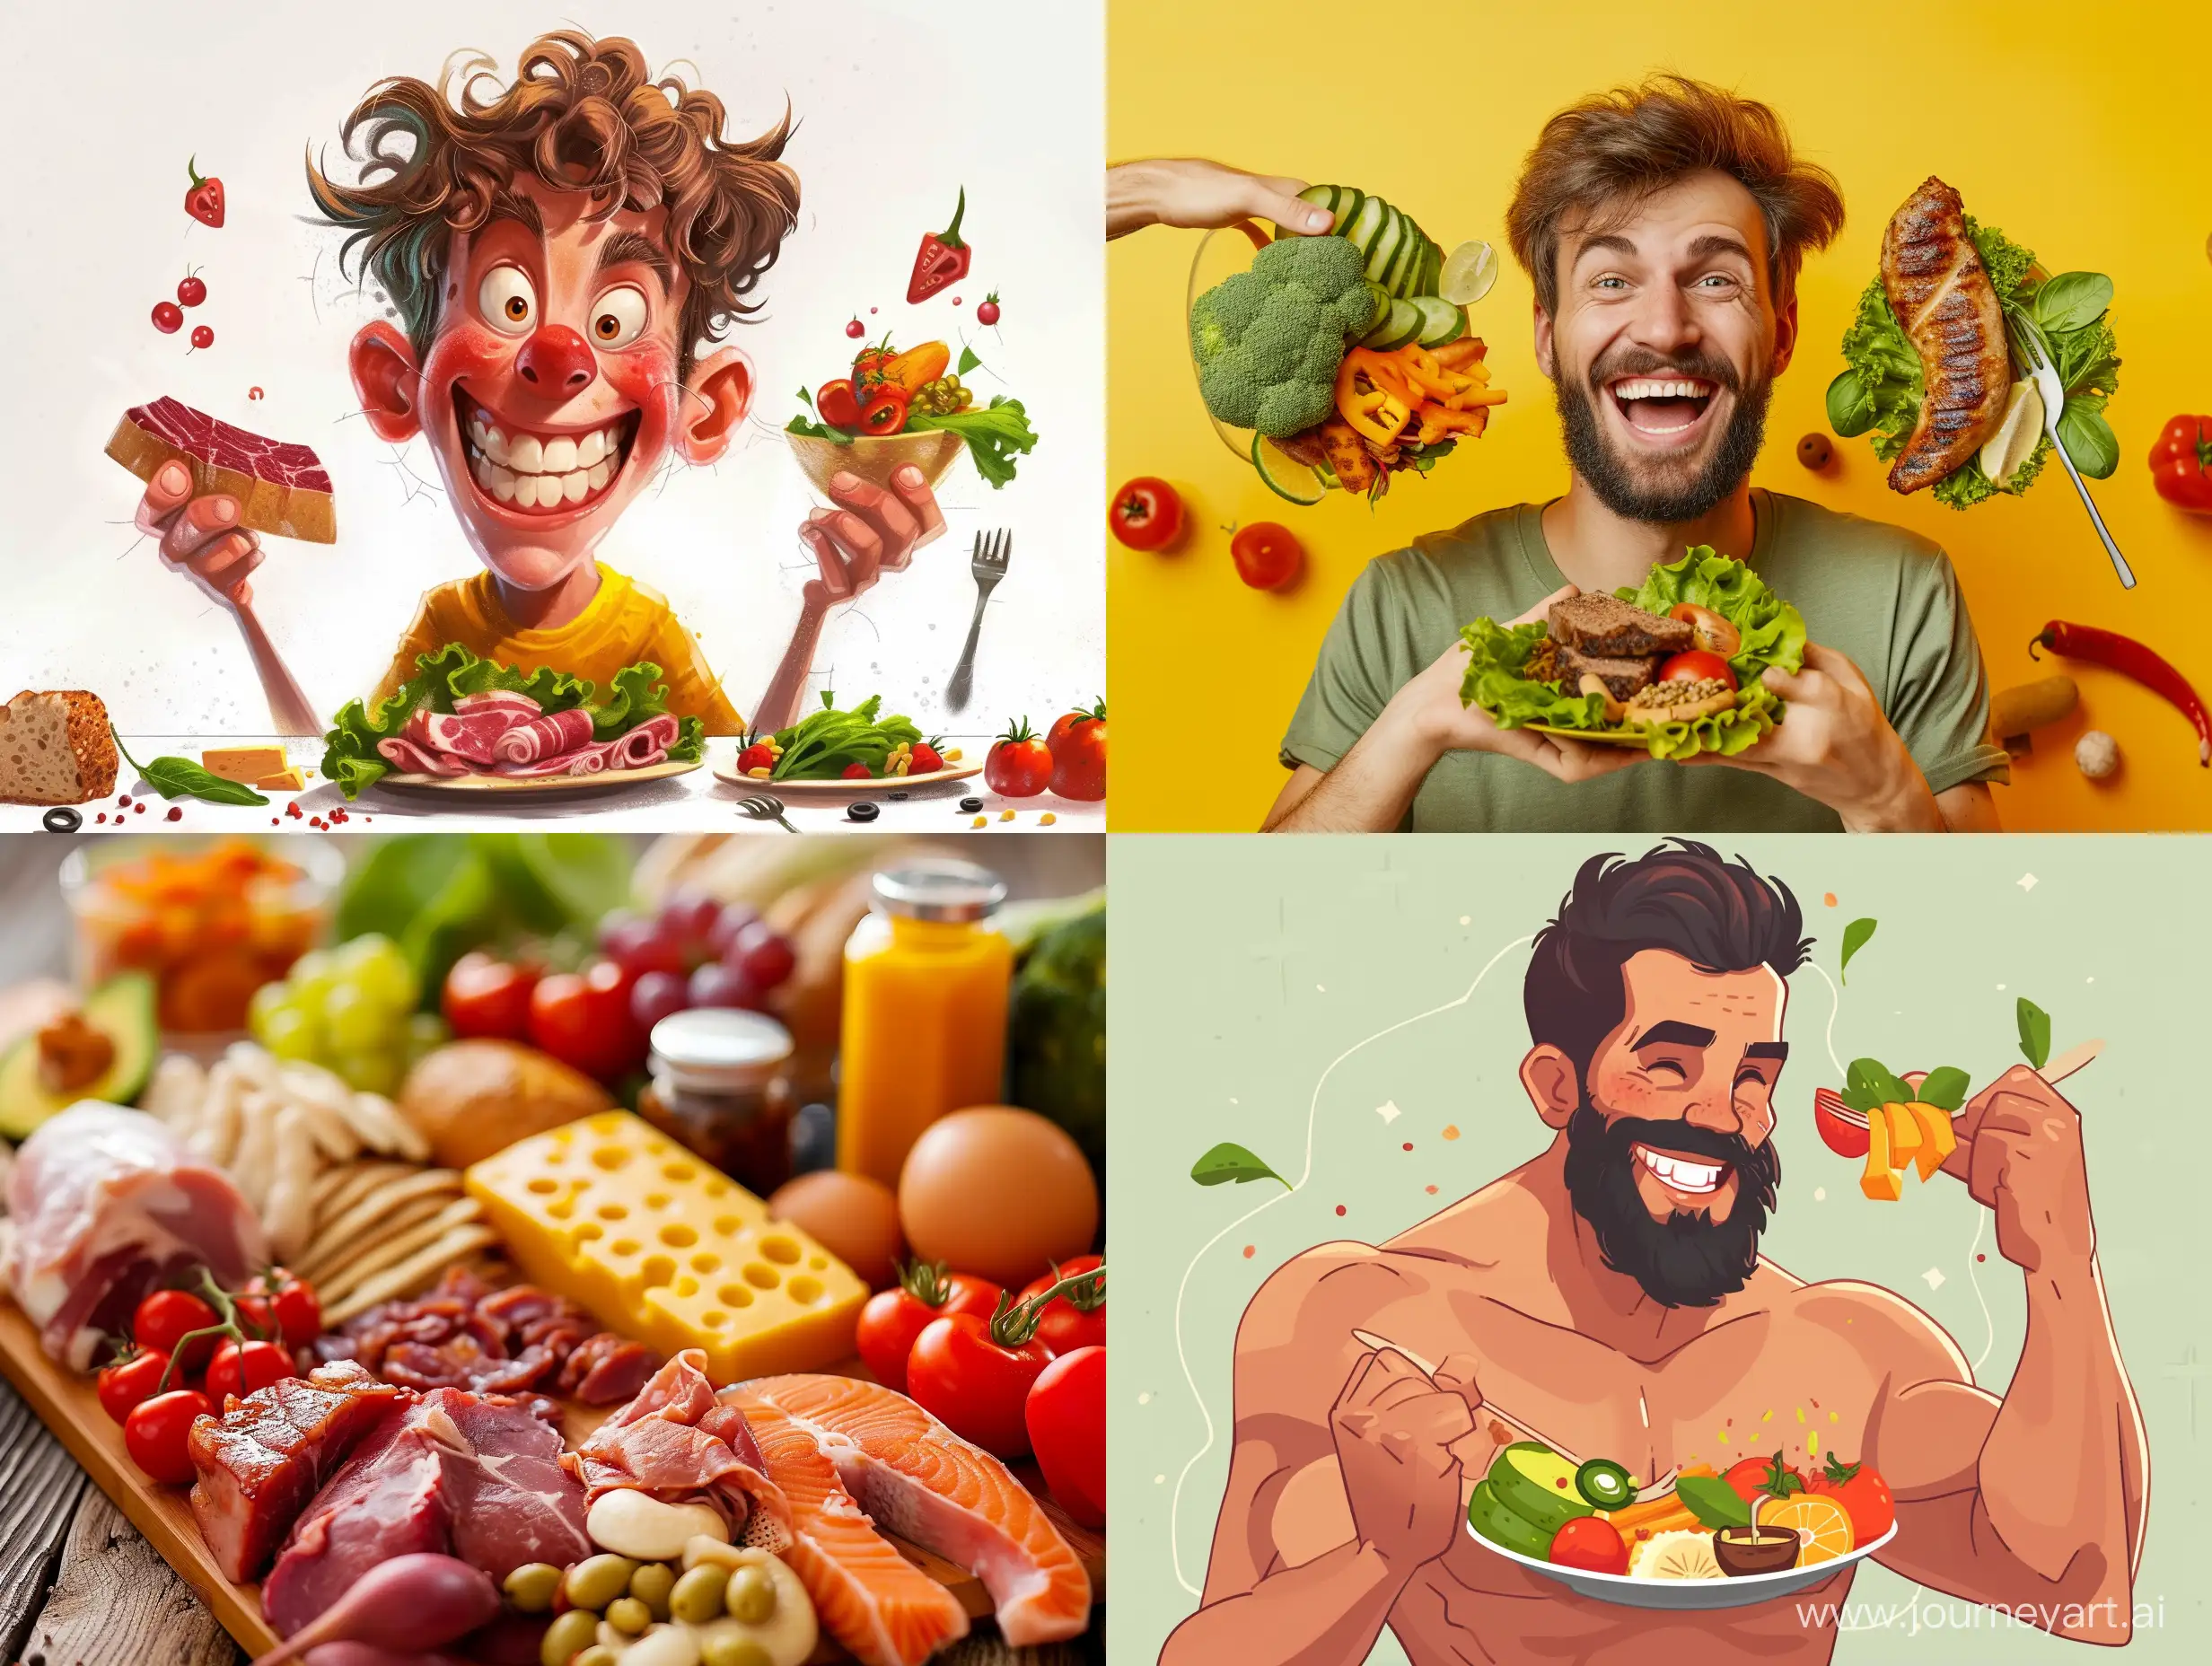 Healthy-Eating-Gigachad-Smiles-in-6x9-Image